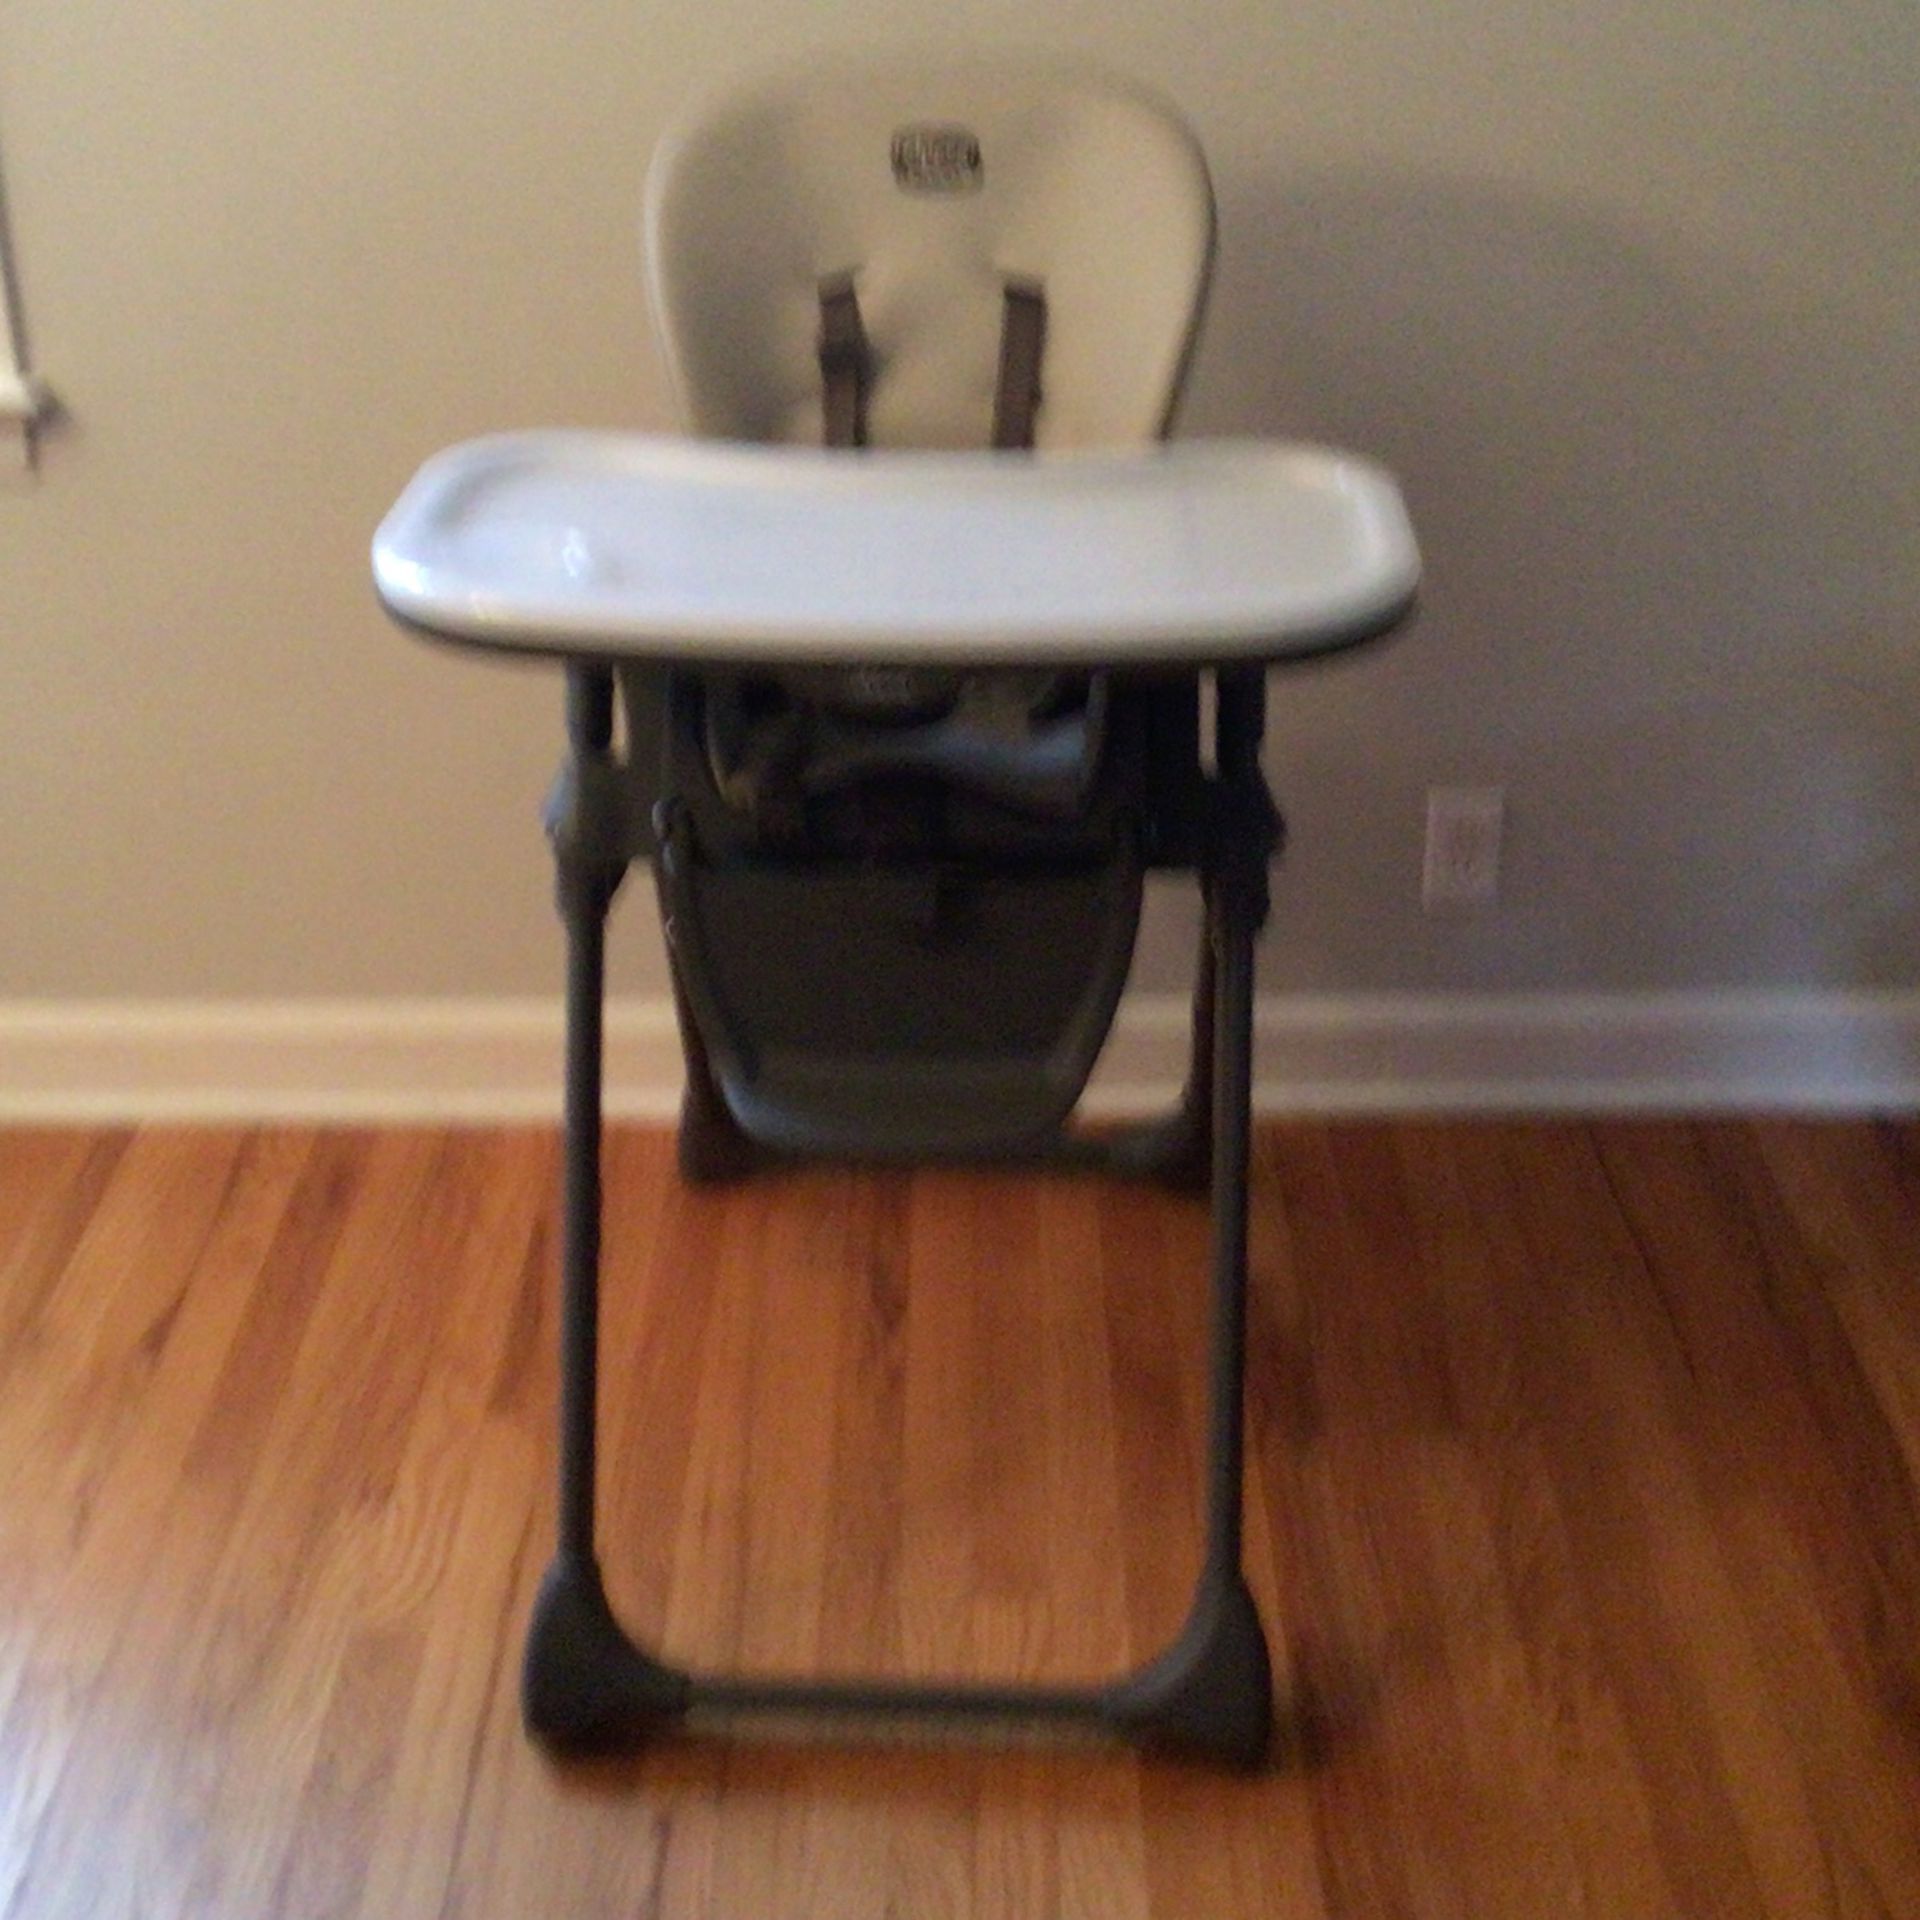 Chicco High chair